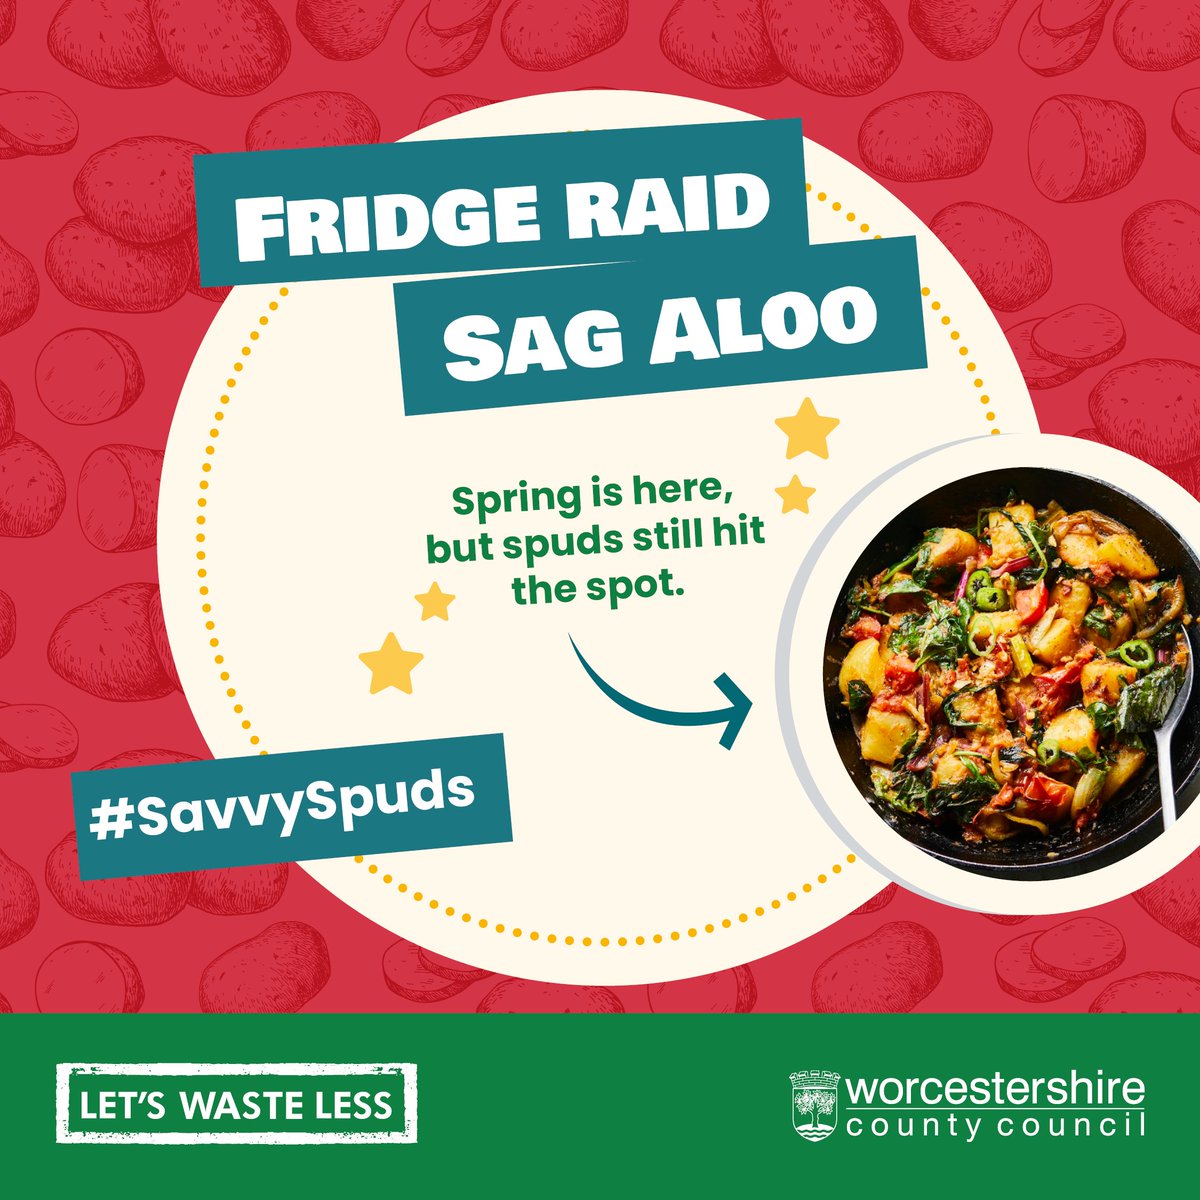 🌱🥔 Fancy using up some spuds in a delicious sag aloo recipe? It's the perfect way to use up any slightly sorry greens and veggies lurking in the fridge. Check out bit.ly/3N7Sa6o #SavvySpuds #FoodSavvyWorcestershire #letswasteless #FoodWaste #FridgeRaid